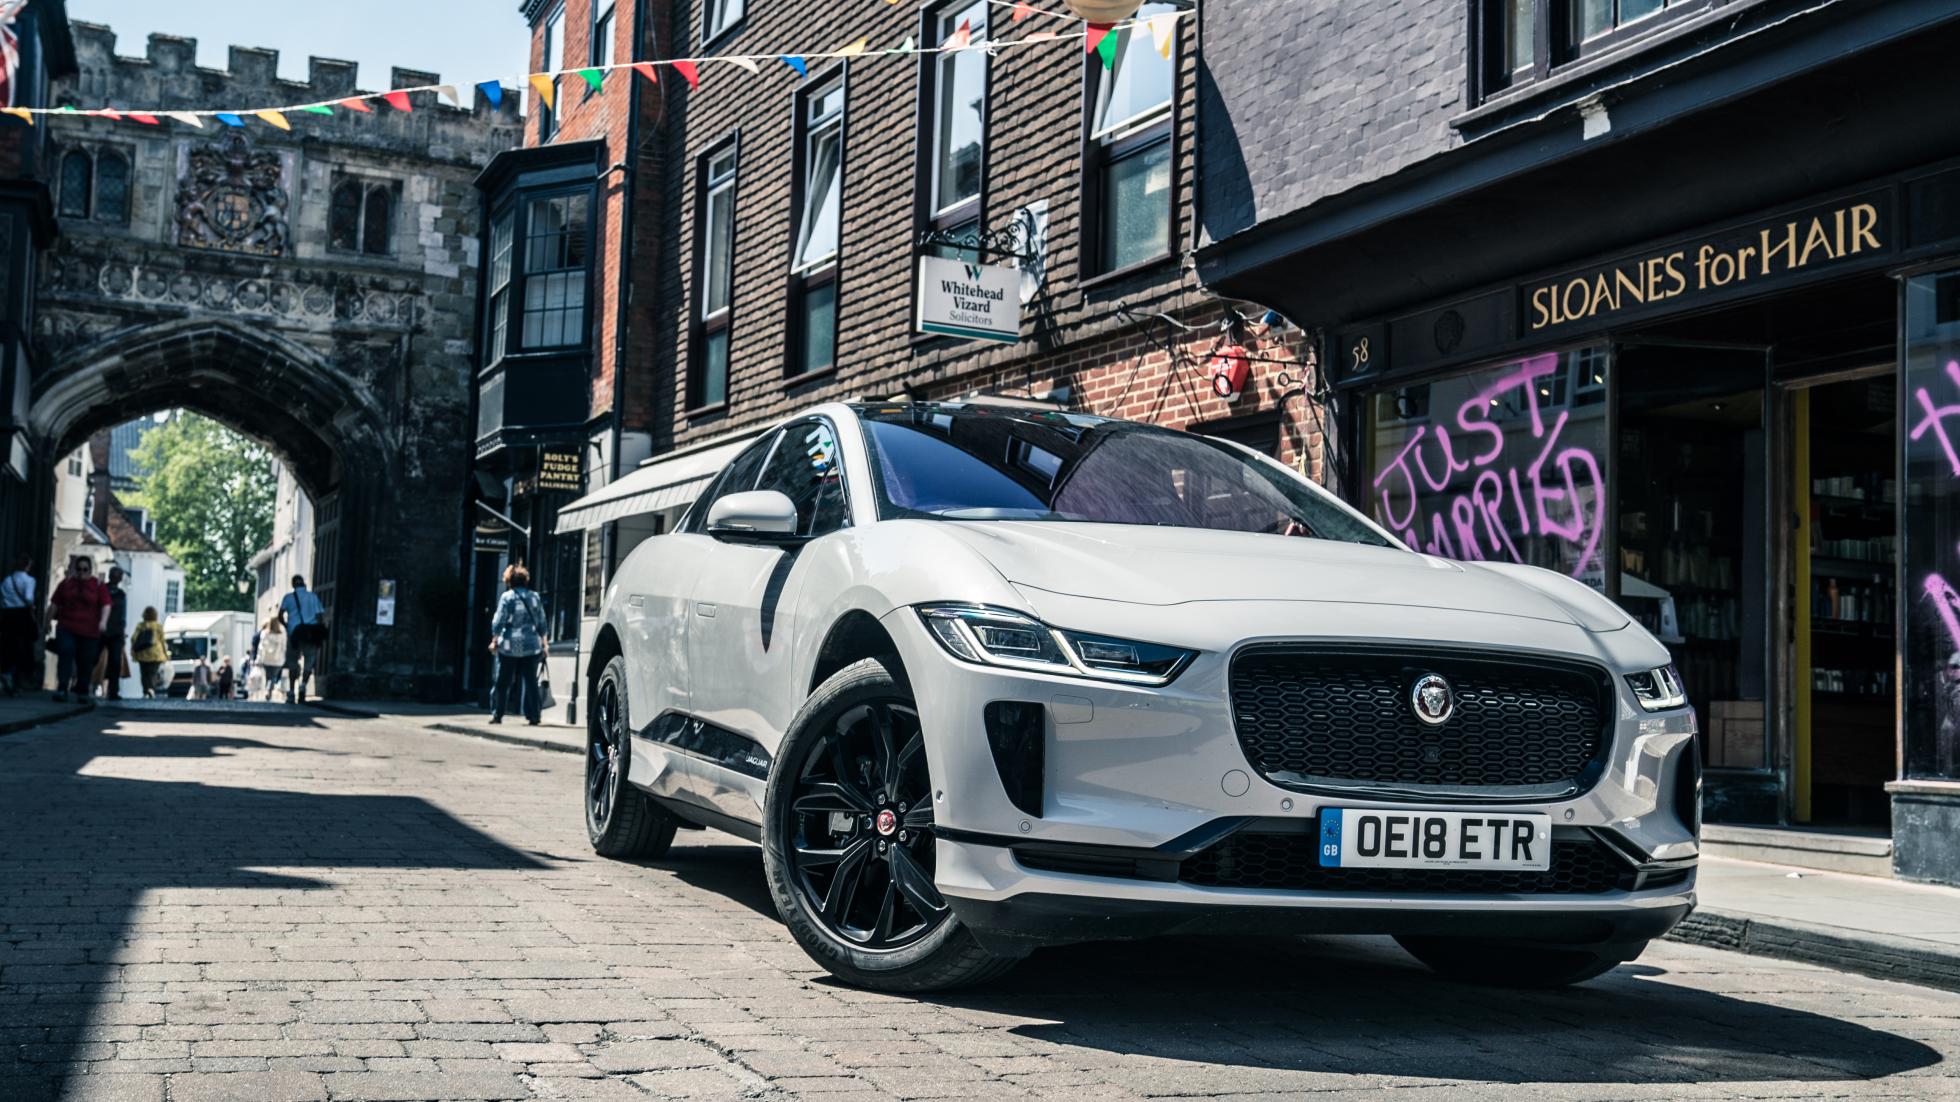 virtuel Indica Vænne sig til Top Gear on Twitter: "Jaguar stepped bravely into the unknown and nailed  it. A rapid, desirable, good-looking SUV that happens to be powered by  electricity. The Top Gear car review: Jaguar I-Pace